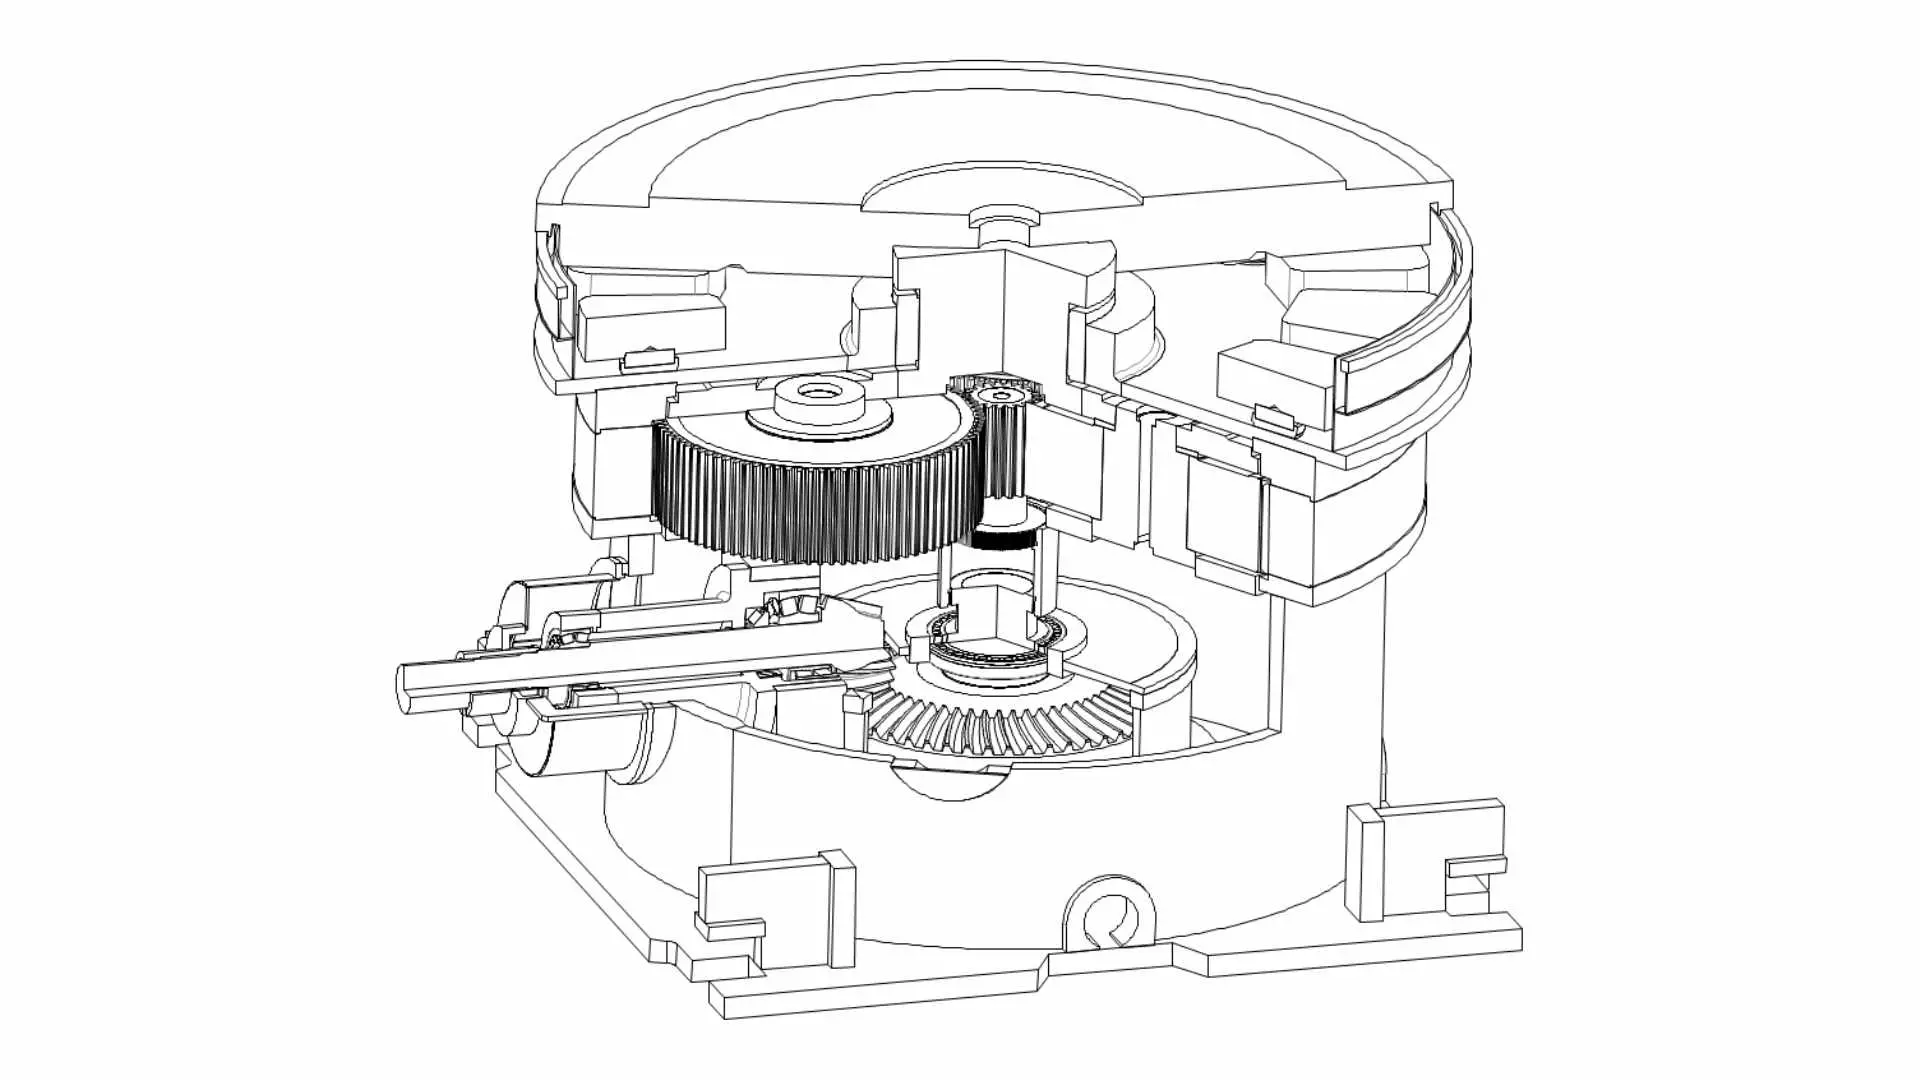 Two-stage, bevel-planetary MAAG® WPU gear unit in sectional view